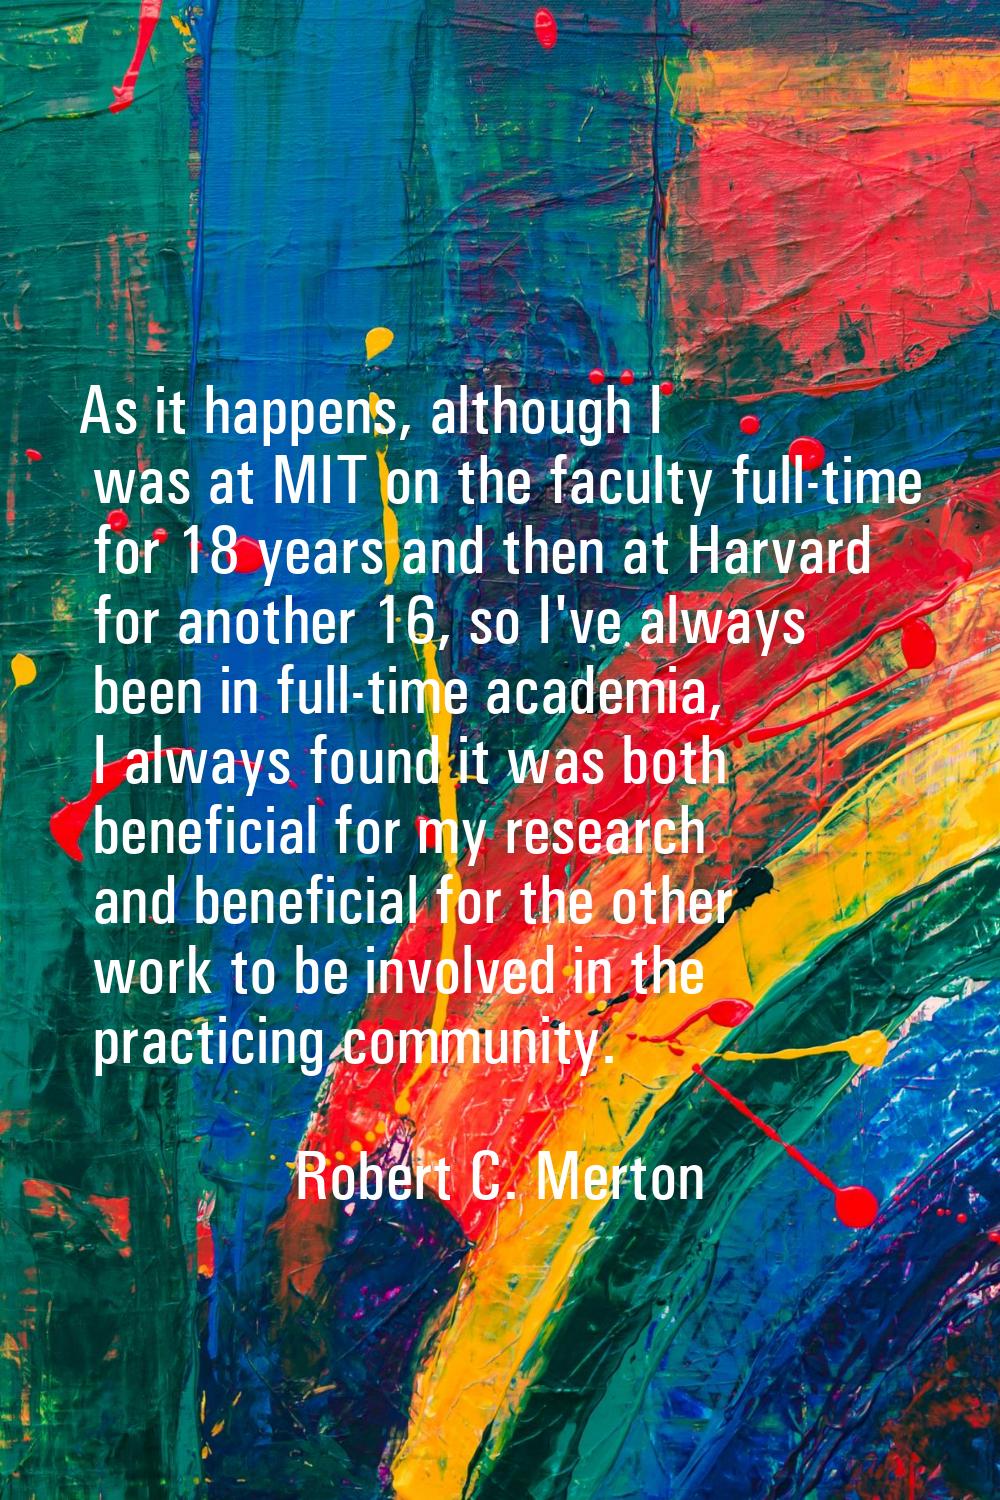 As it happens, although I was at MIT on the faculty full-time for 18 years and then at Harvard for 